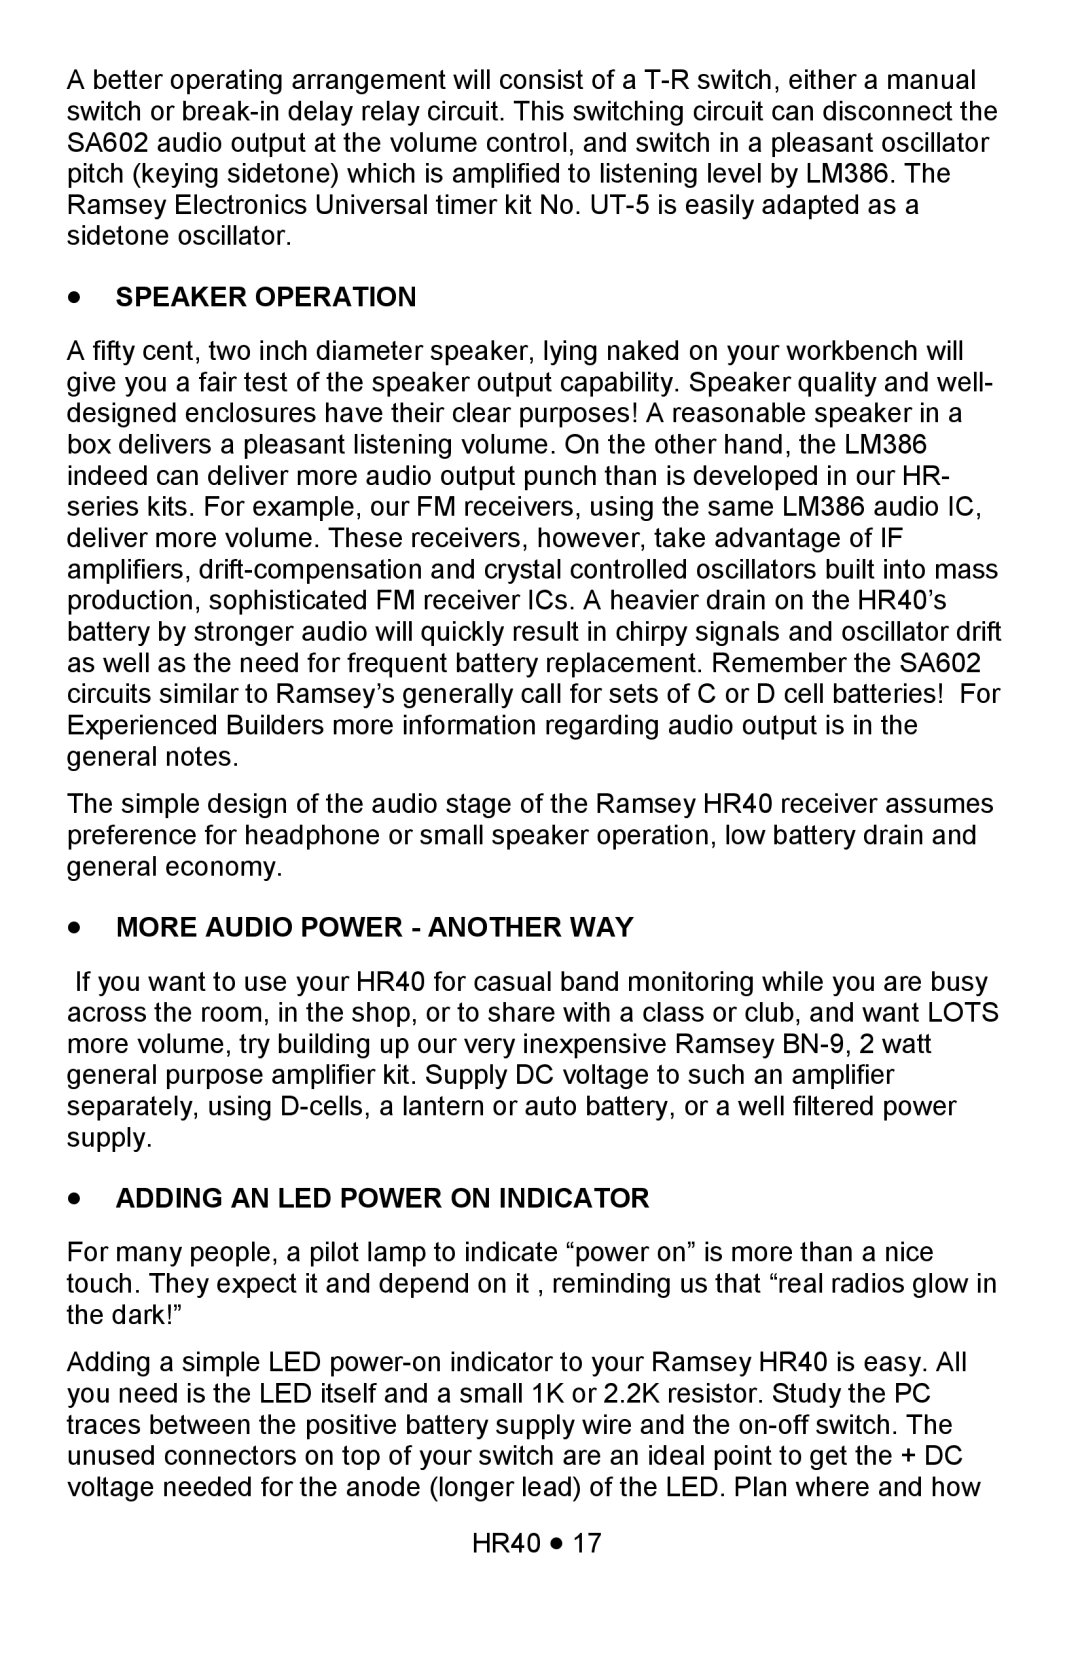 Ramsey Electronics HR40 manual Speaker Operation, More Audio Power - Another Way, Adding An Led Power On Indicator 